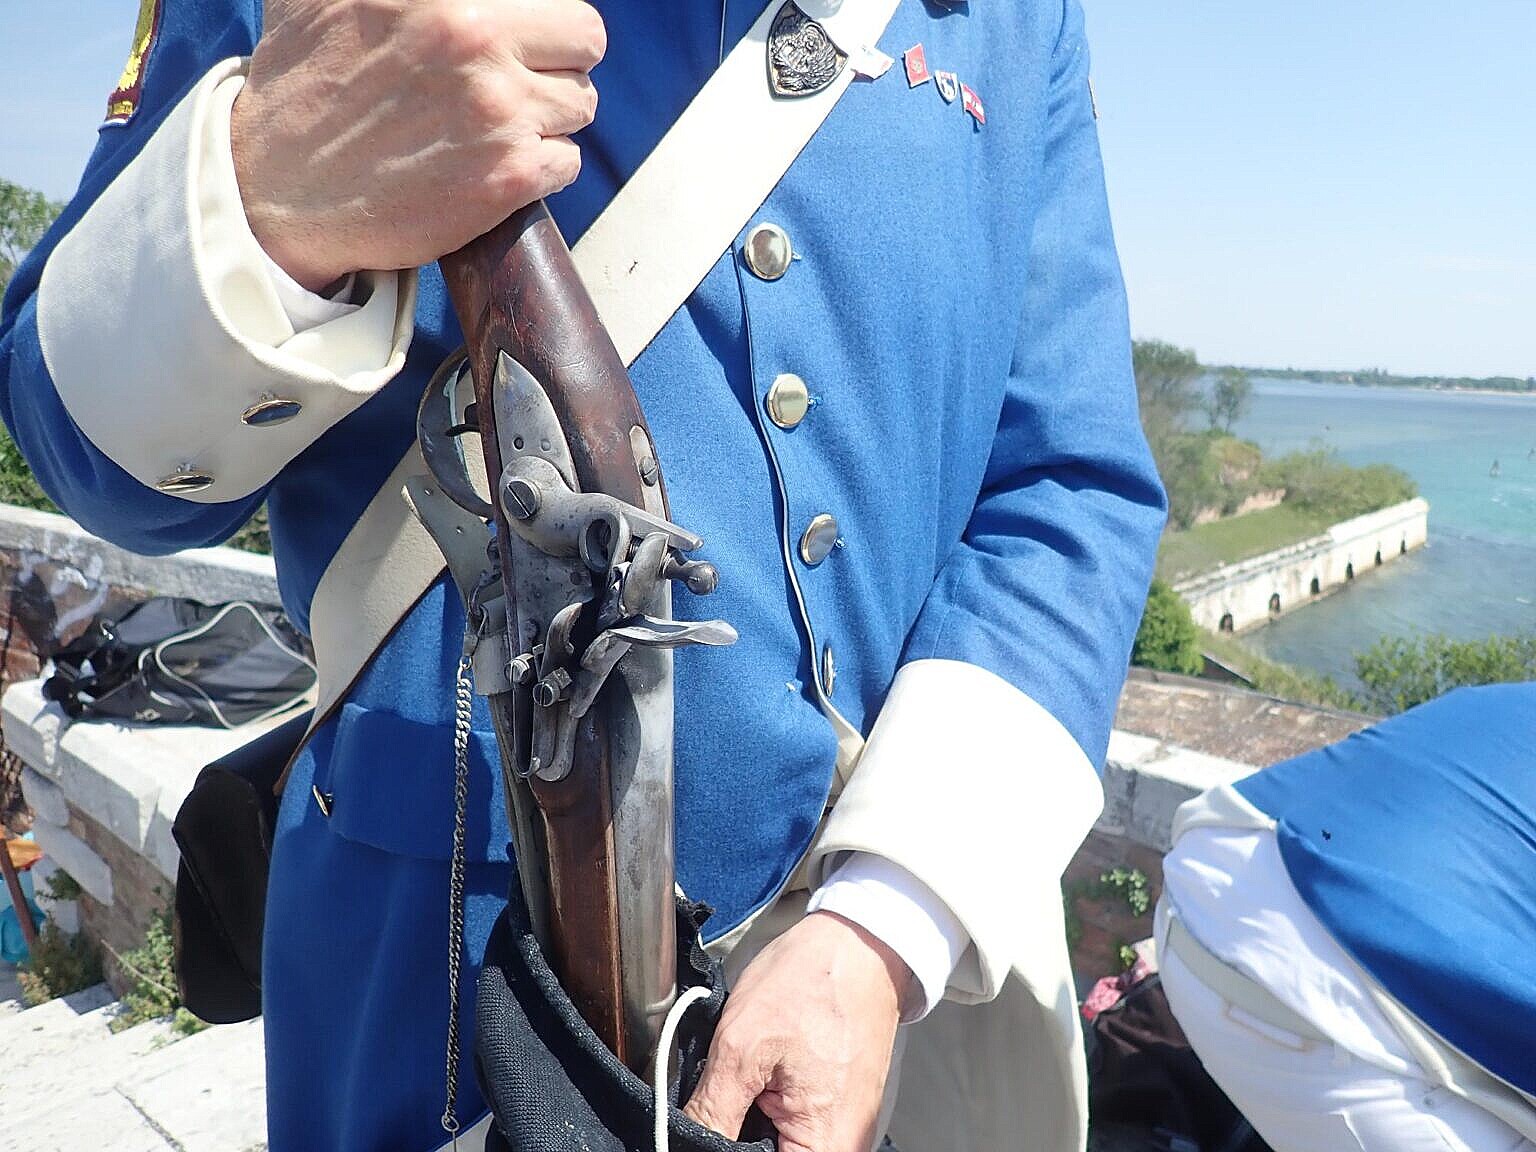 Putting the musket away - details of the equipment